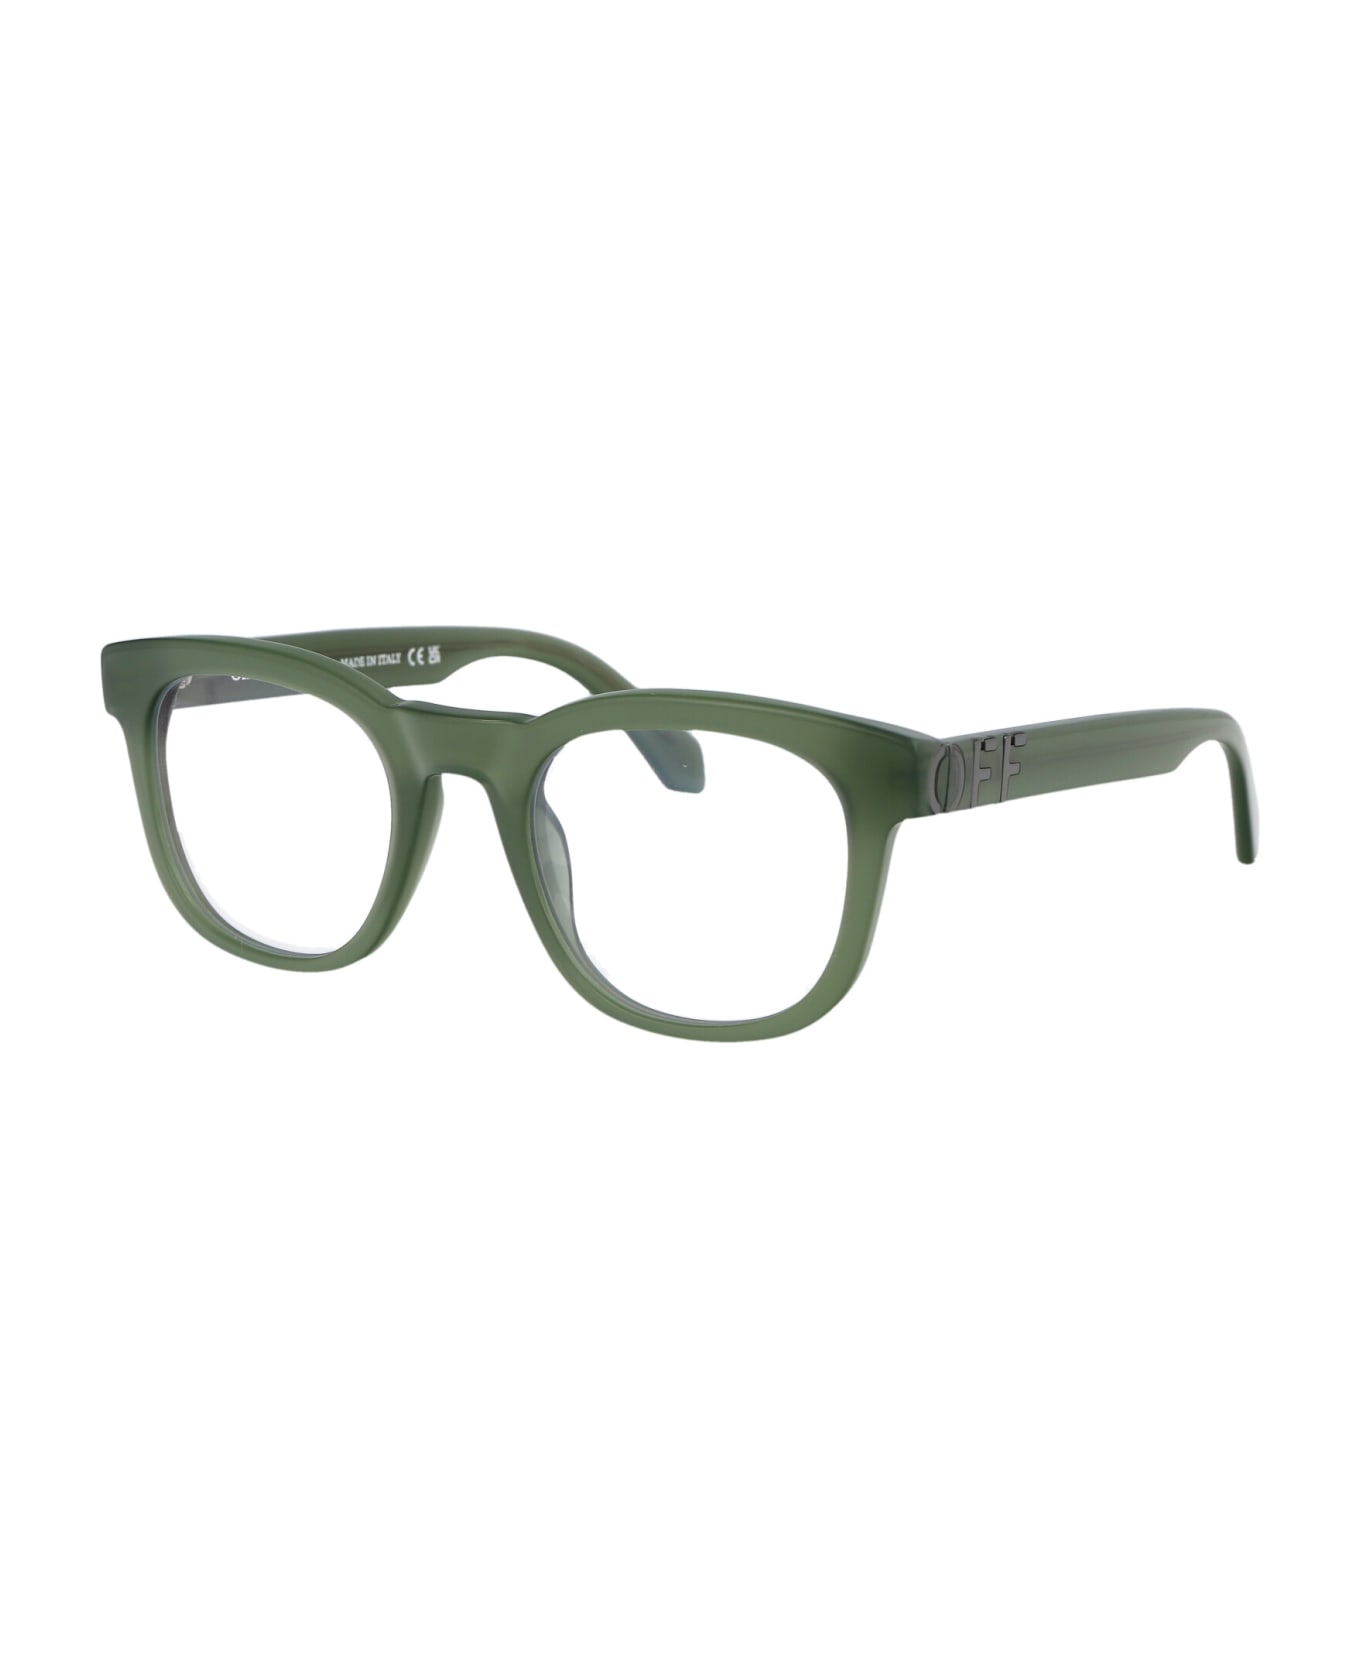 Off-White Optical Style 71 Glasses - 5900 OLIVE GREEN 